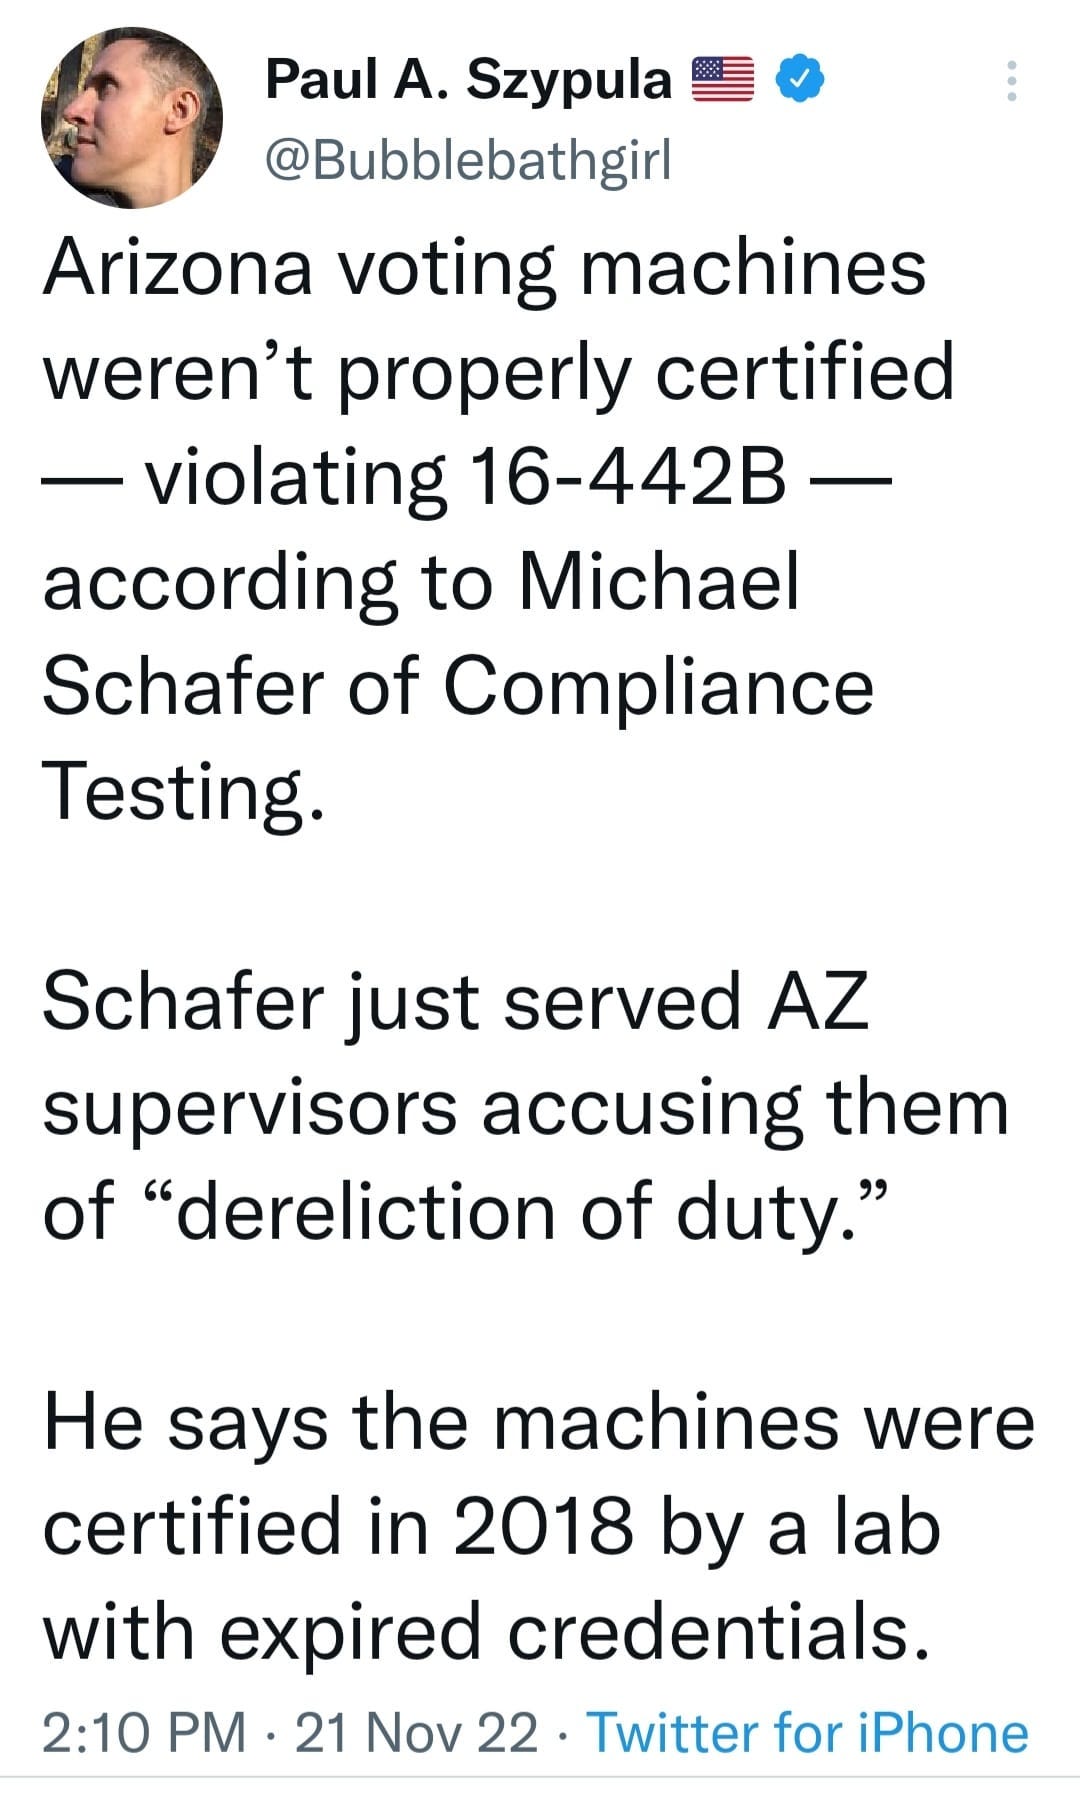 May be an image of 1 person and text that says 'Paul A. Szypula @Bubblebathgirl Arizona voting machines weren't properly certified -violating 16-442B- according to Michael Schafer of Compliance Testing. Schafer just served AZ supervisors accusing them of "dereliction of duty." He says the machines were certified in 2018 by a lab with expired credentials. 2:10 PM 21 Nov 22. Twitter for iPhone'